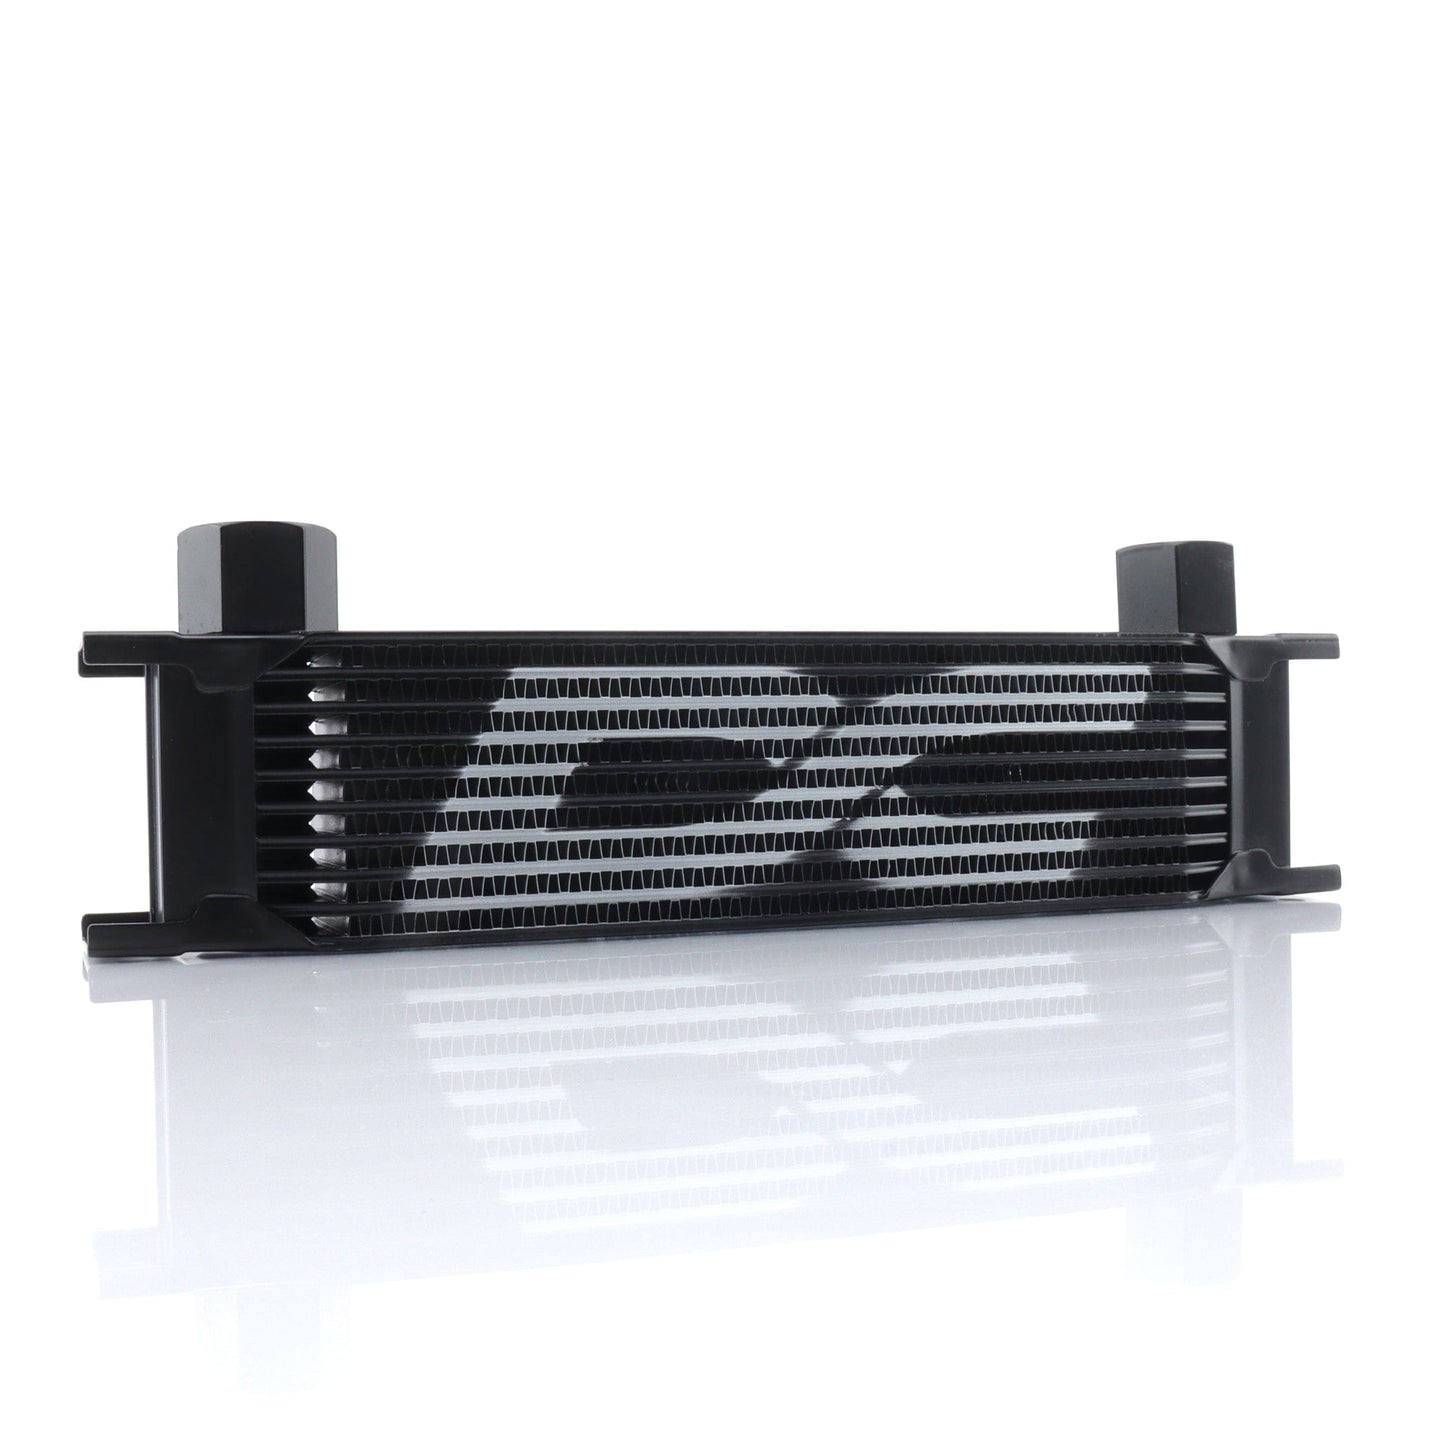 DC Sports Oil Cooler No Fittings DC SPORTS 10 ROW UNIVERSAL OIL COOLER; BLACK